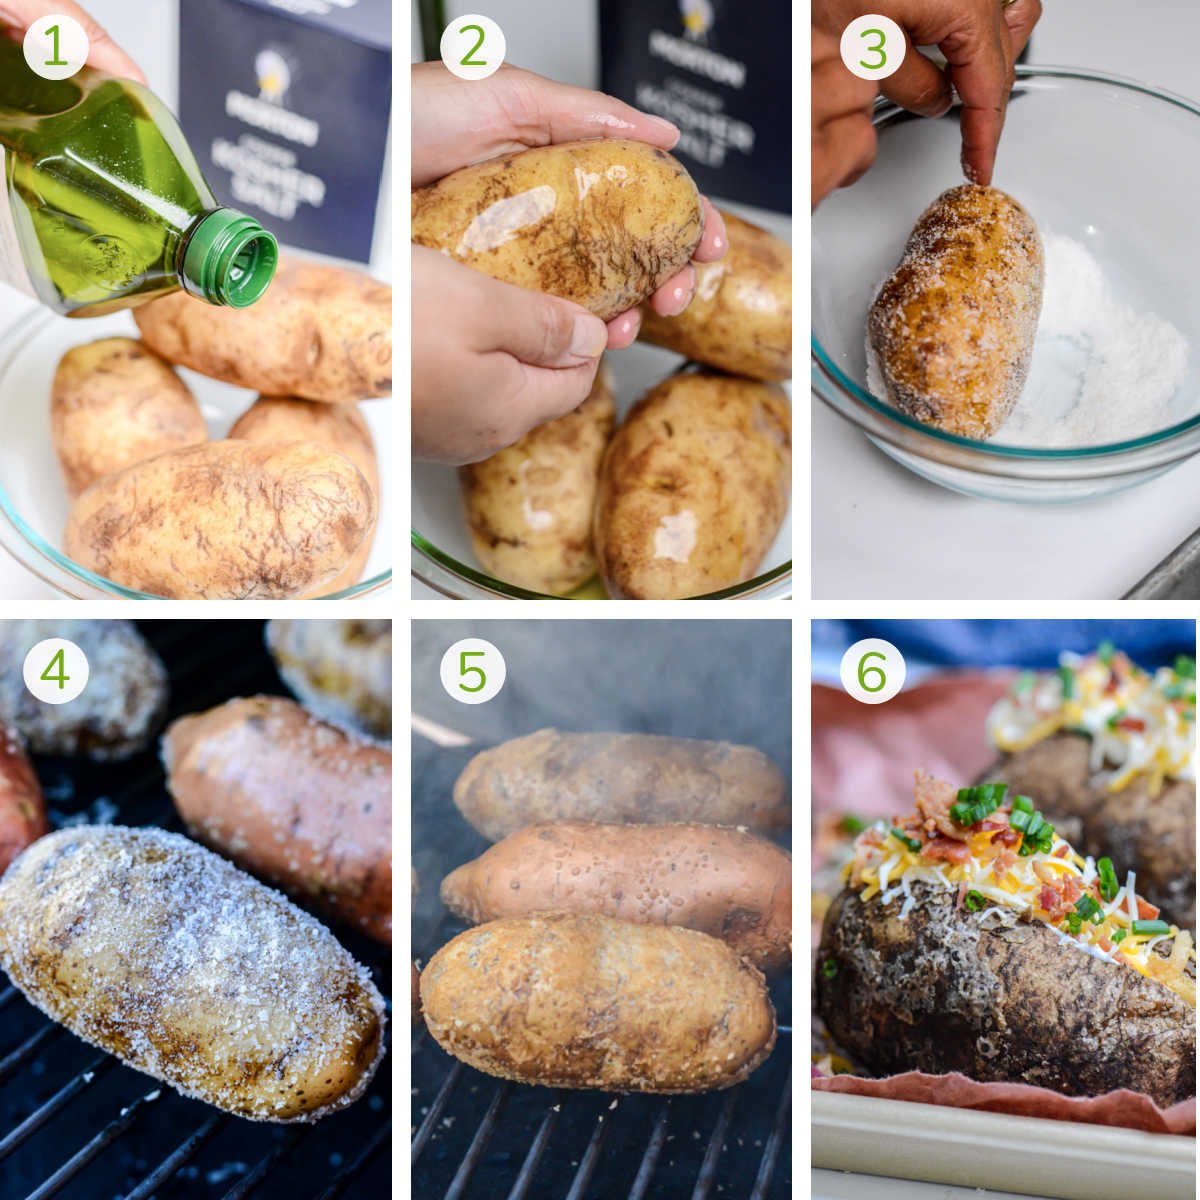 instruction photos showing oiling the potatoes, salting them, smoking and then adding all of the goodies for a fully loaded potato.